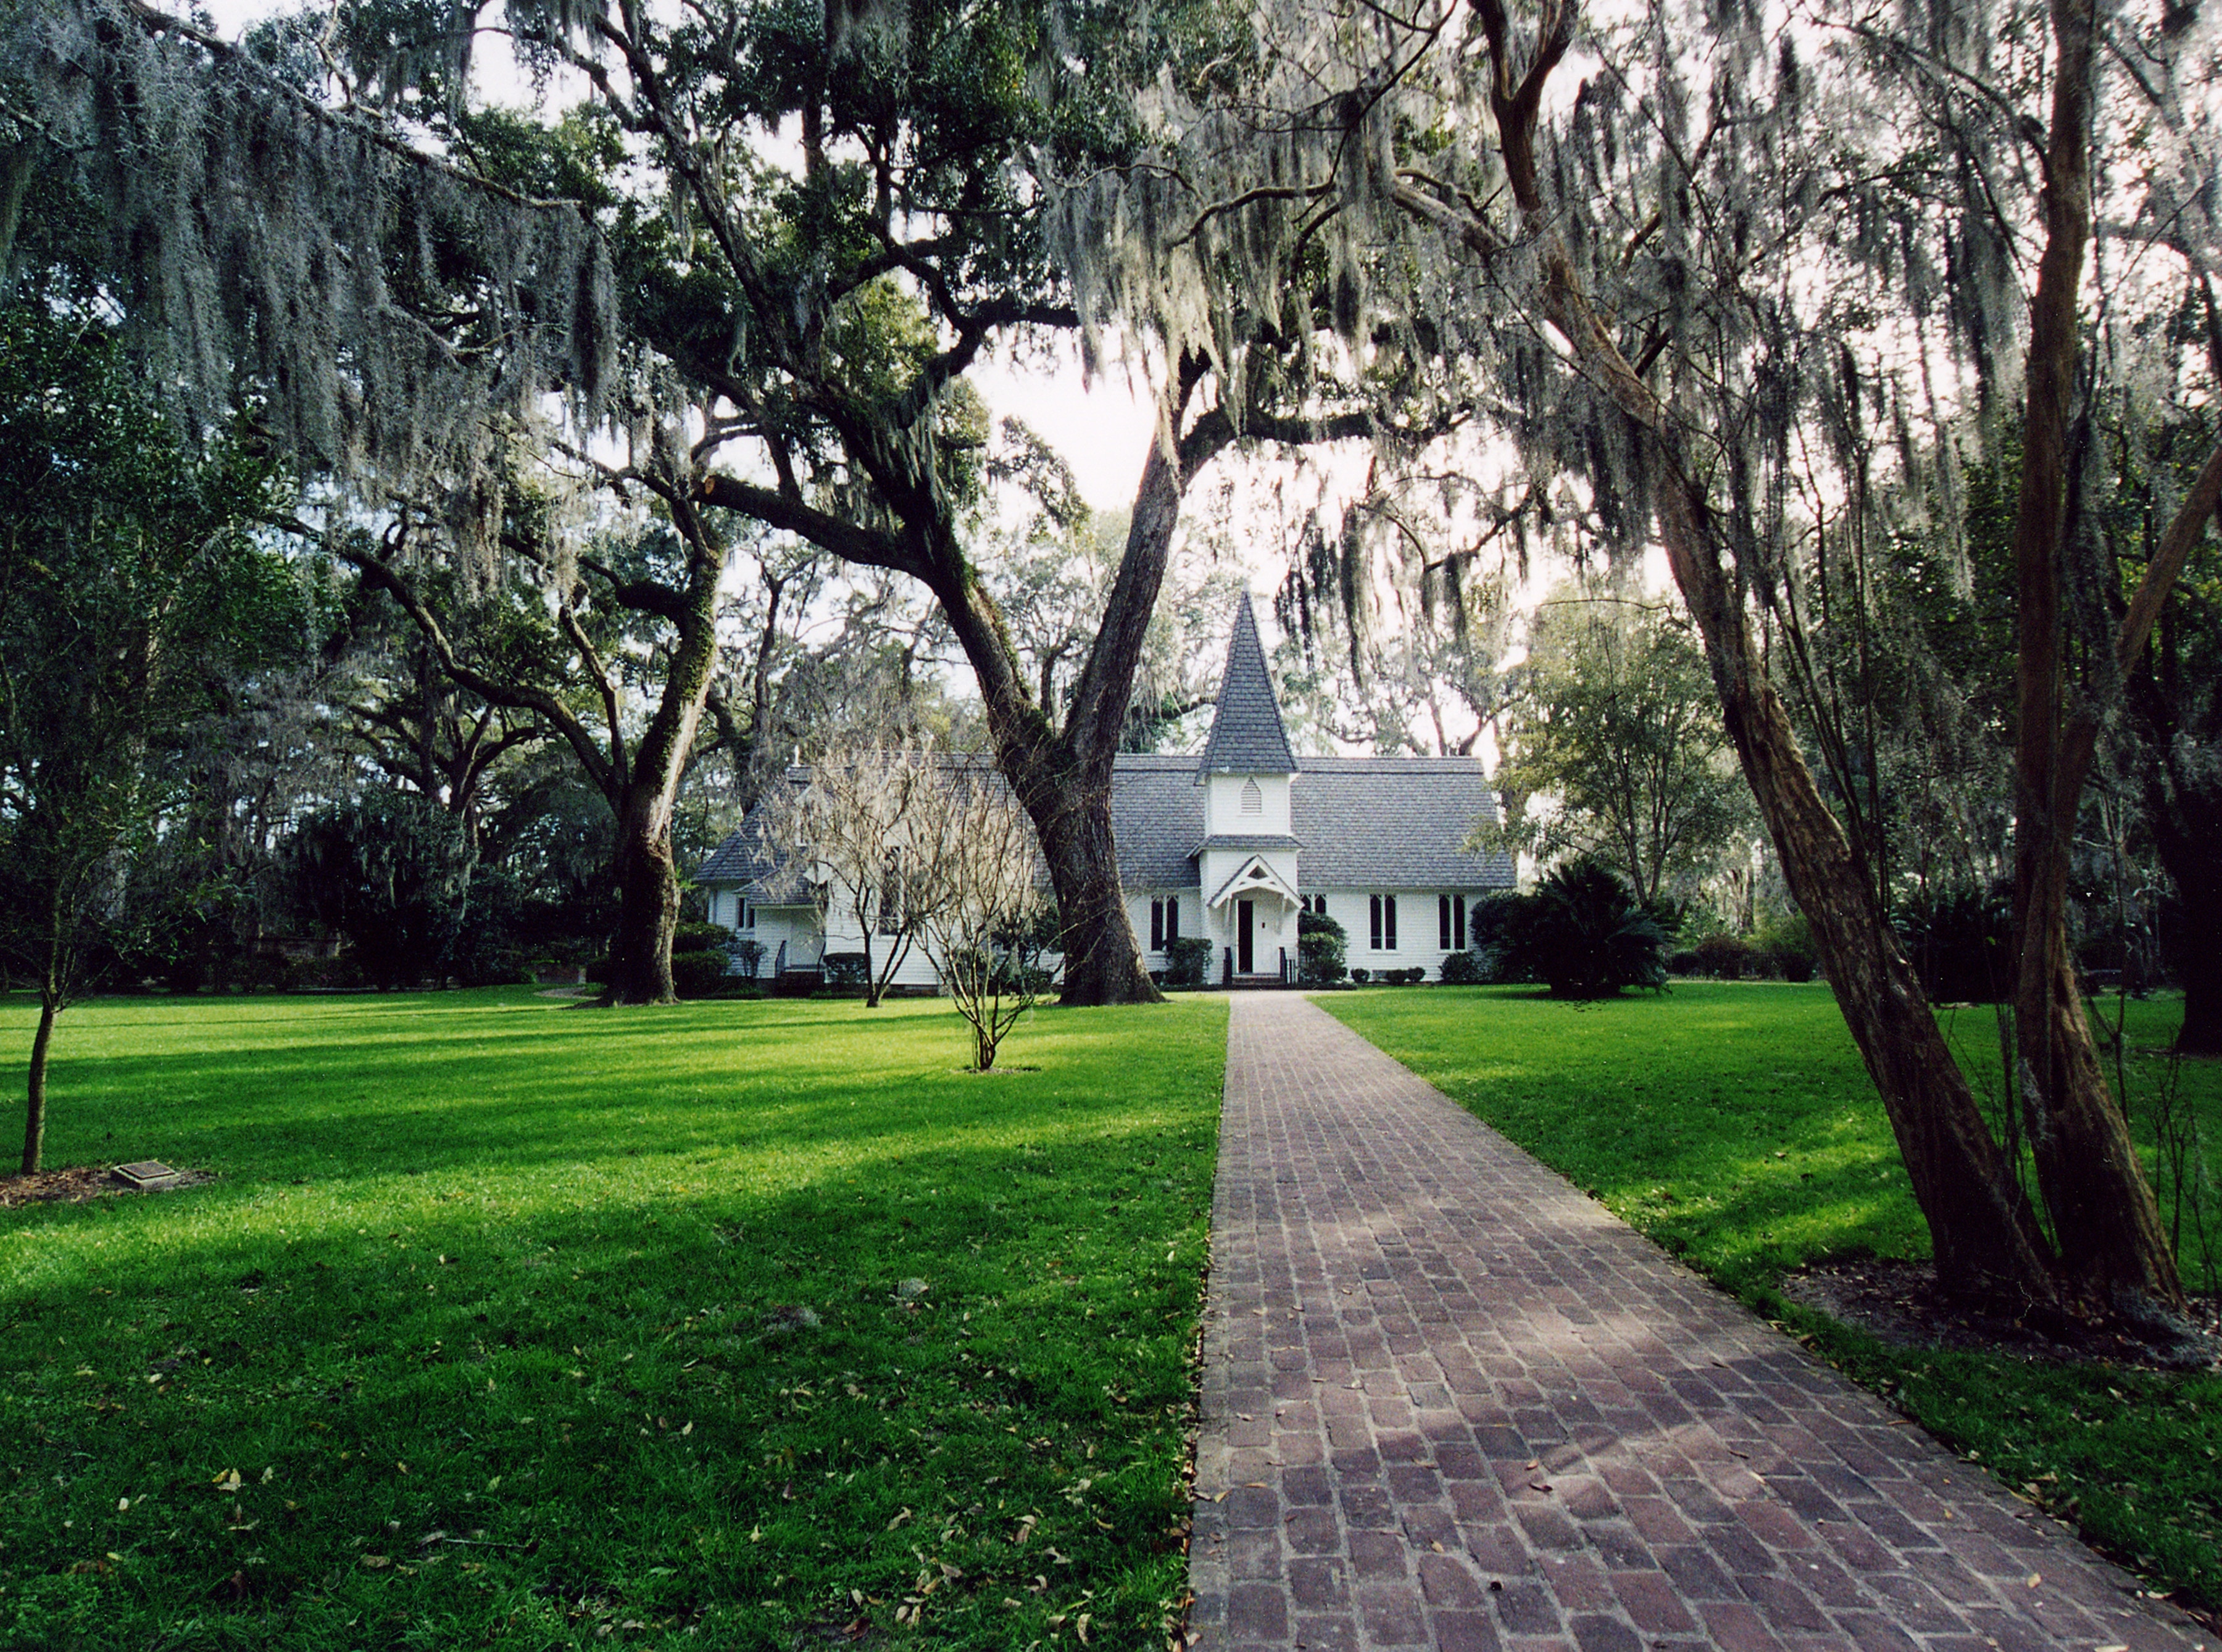 Beautiful church surrounded by Live Oaks.